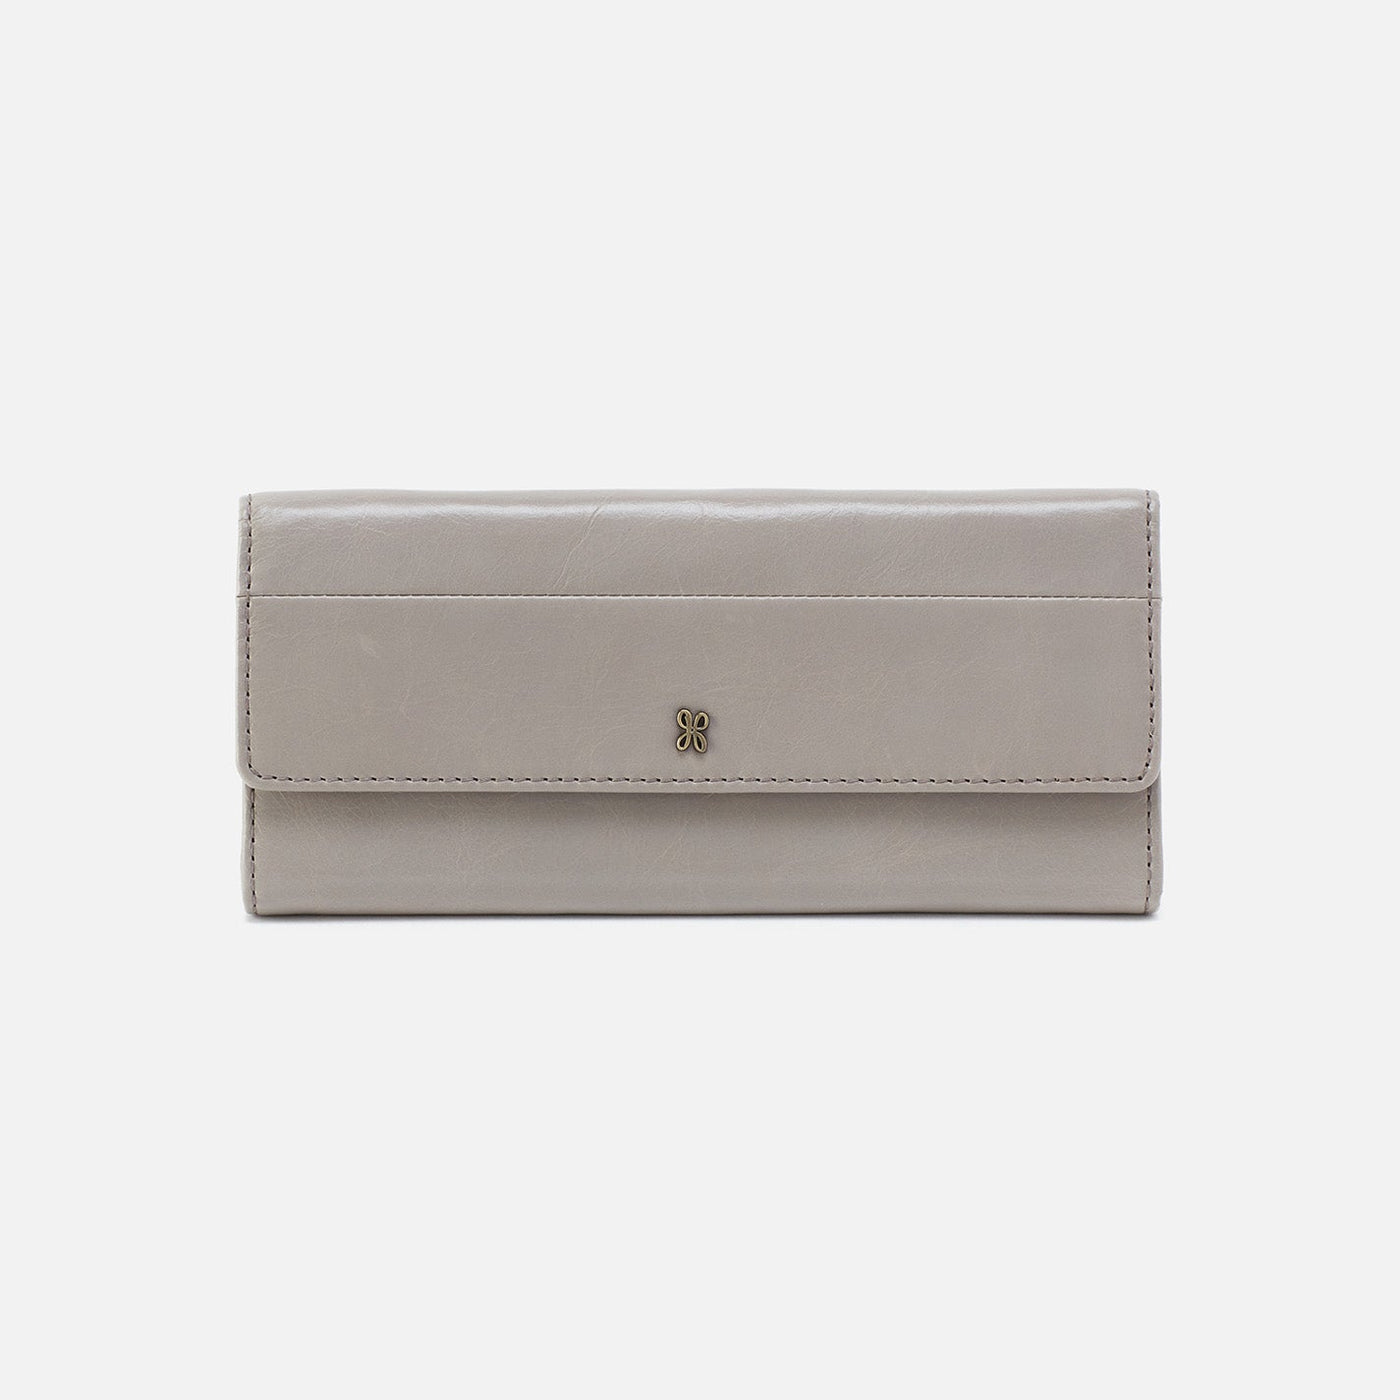 Jill Large Trifold Continental Wallet in Polished Leather - Driftwood